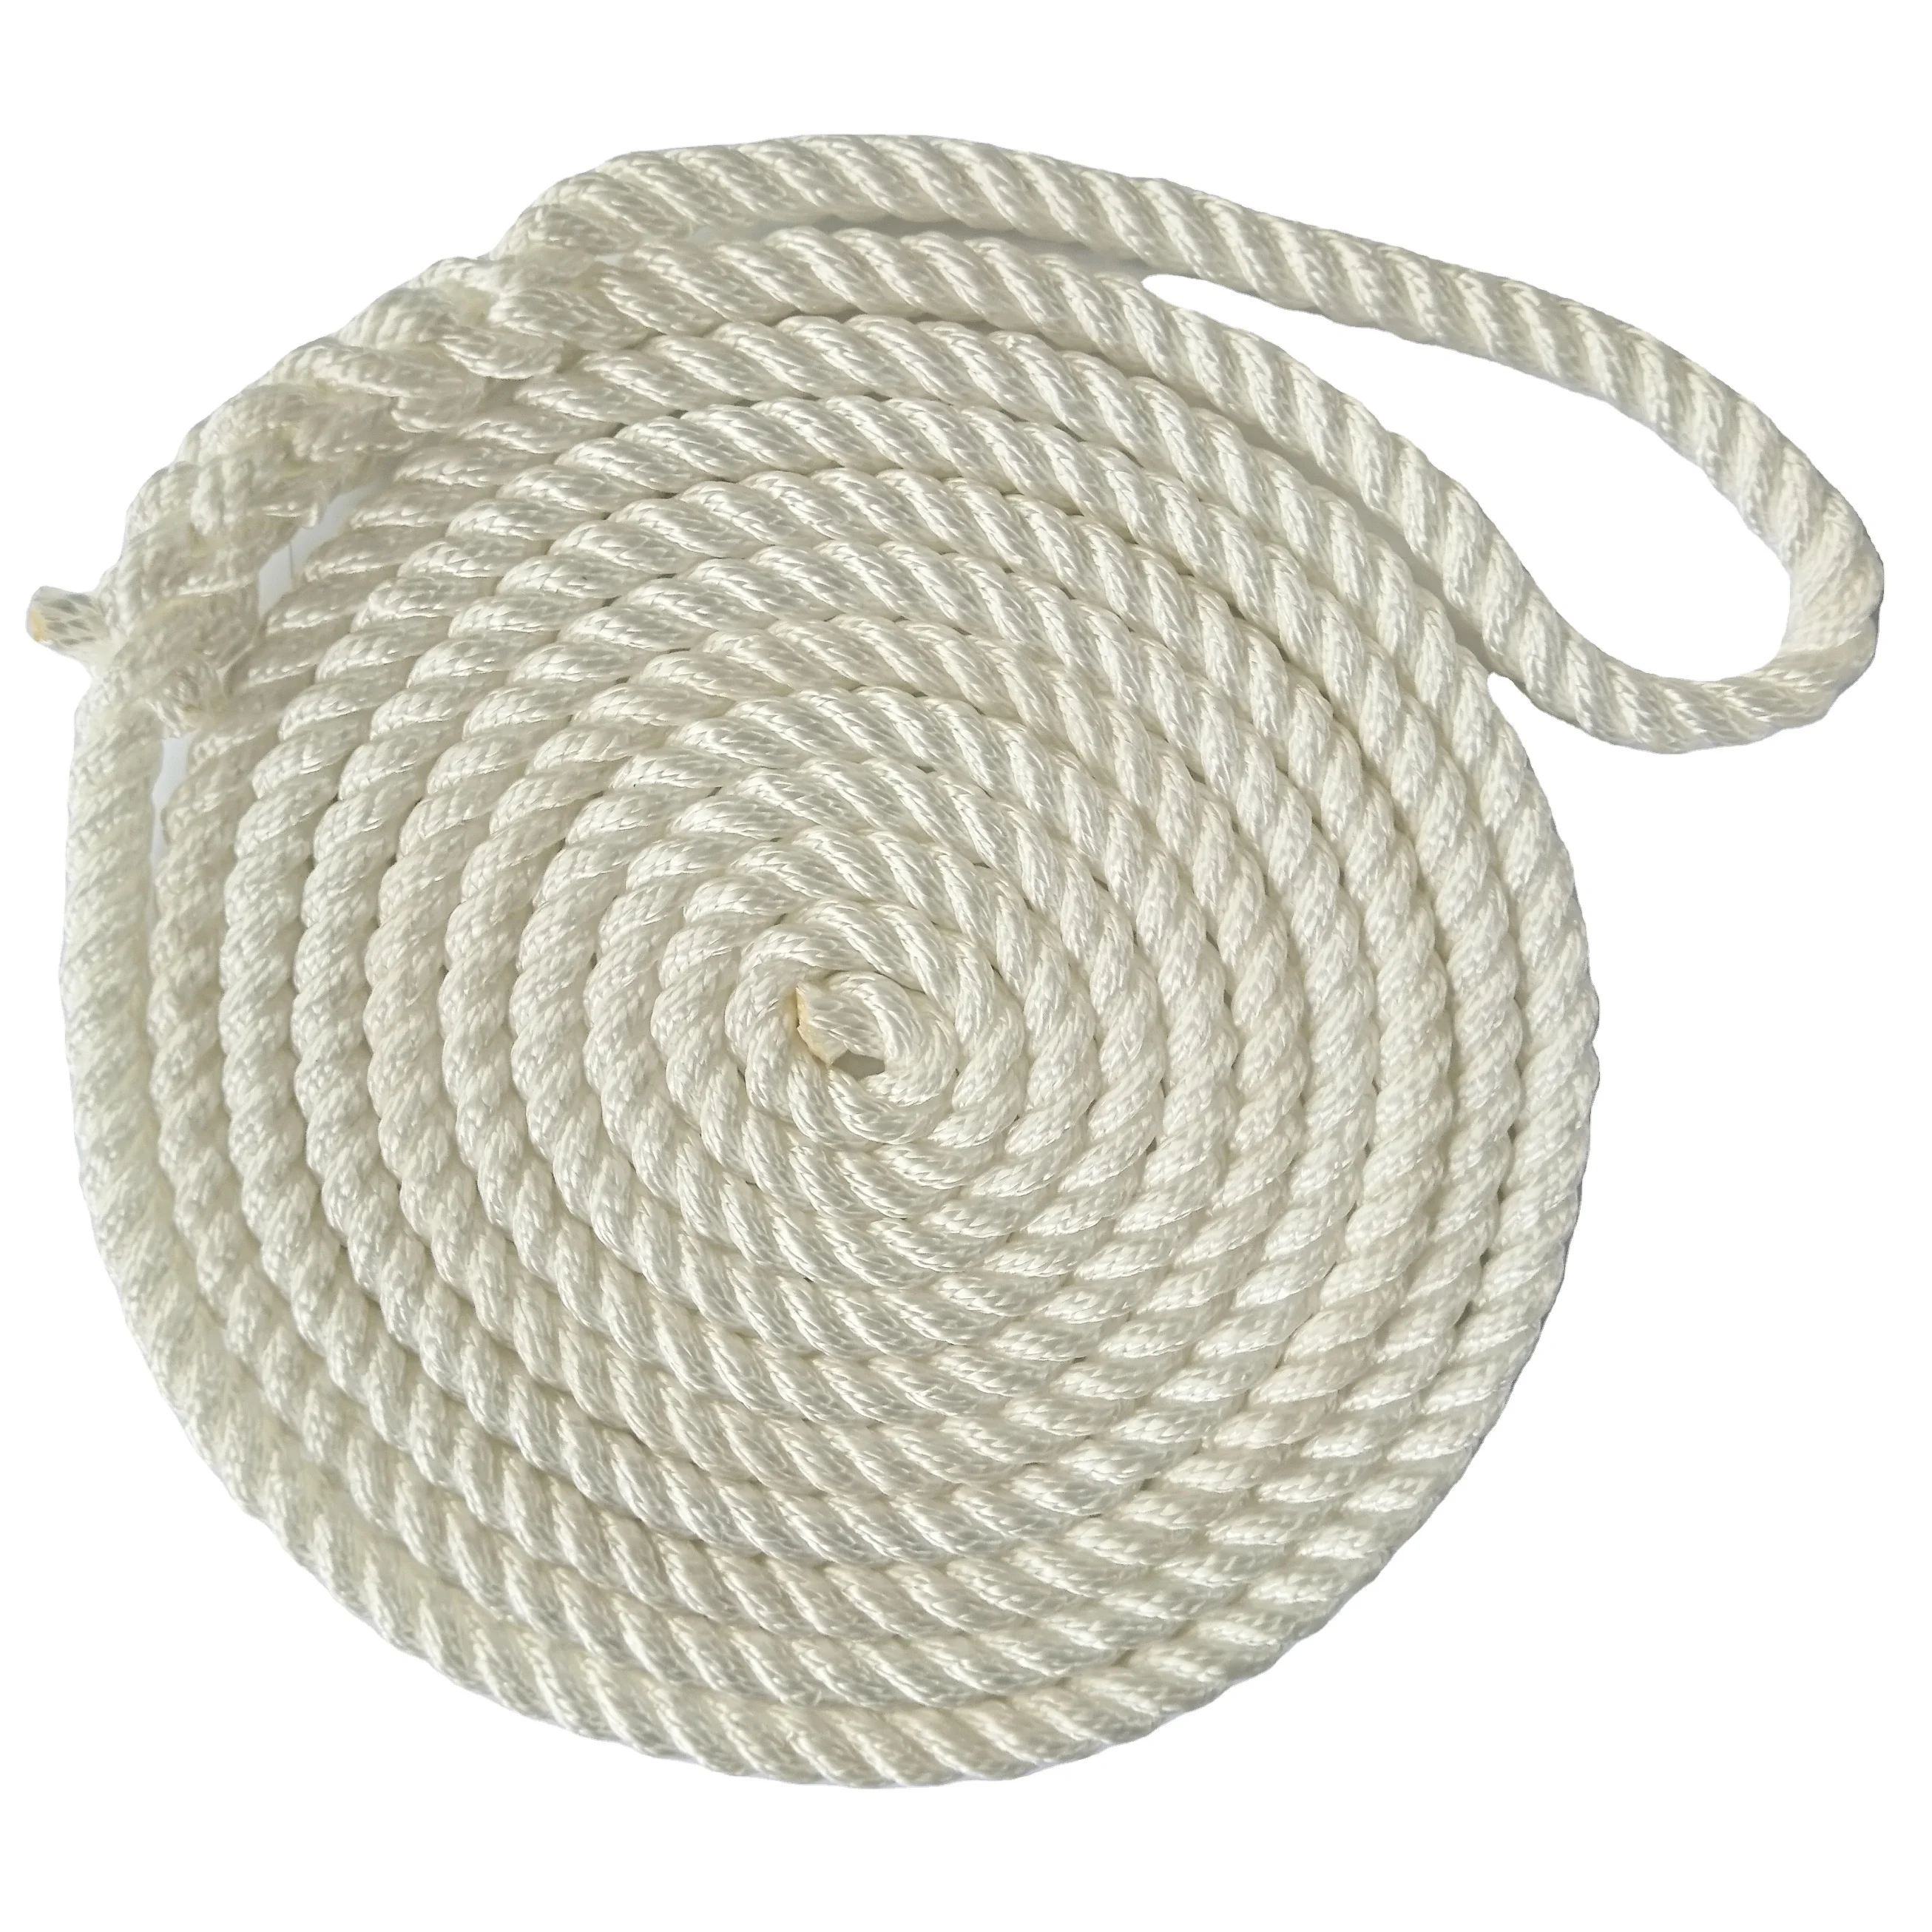 best selling 3 strand nylon rope dock rope nice lines fit perfectly rowing boats mooring rope white color in stock